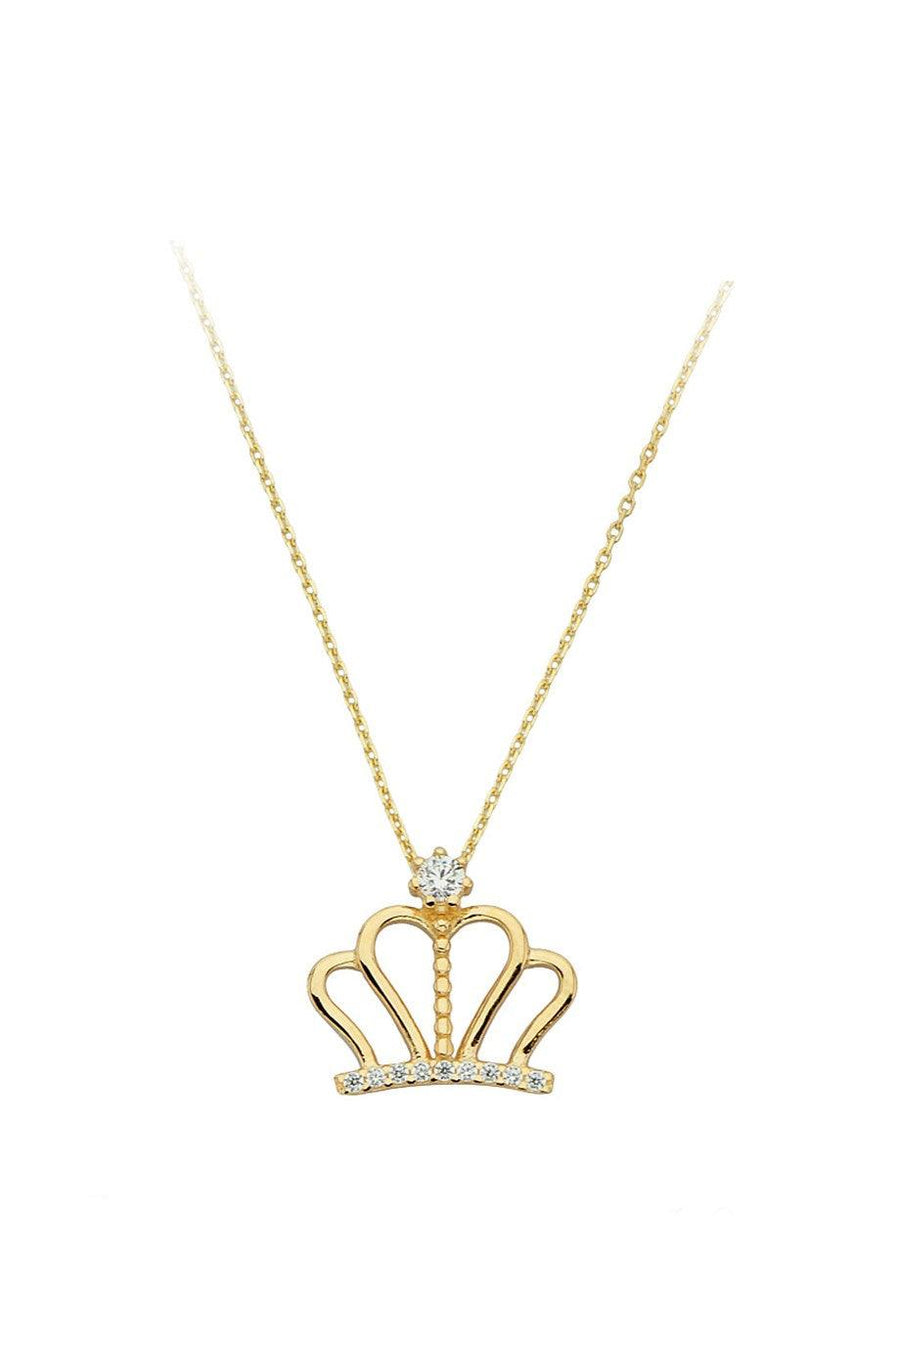 Golden King Crown Necklace